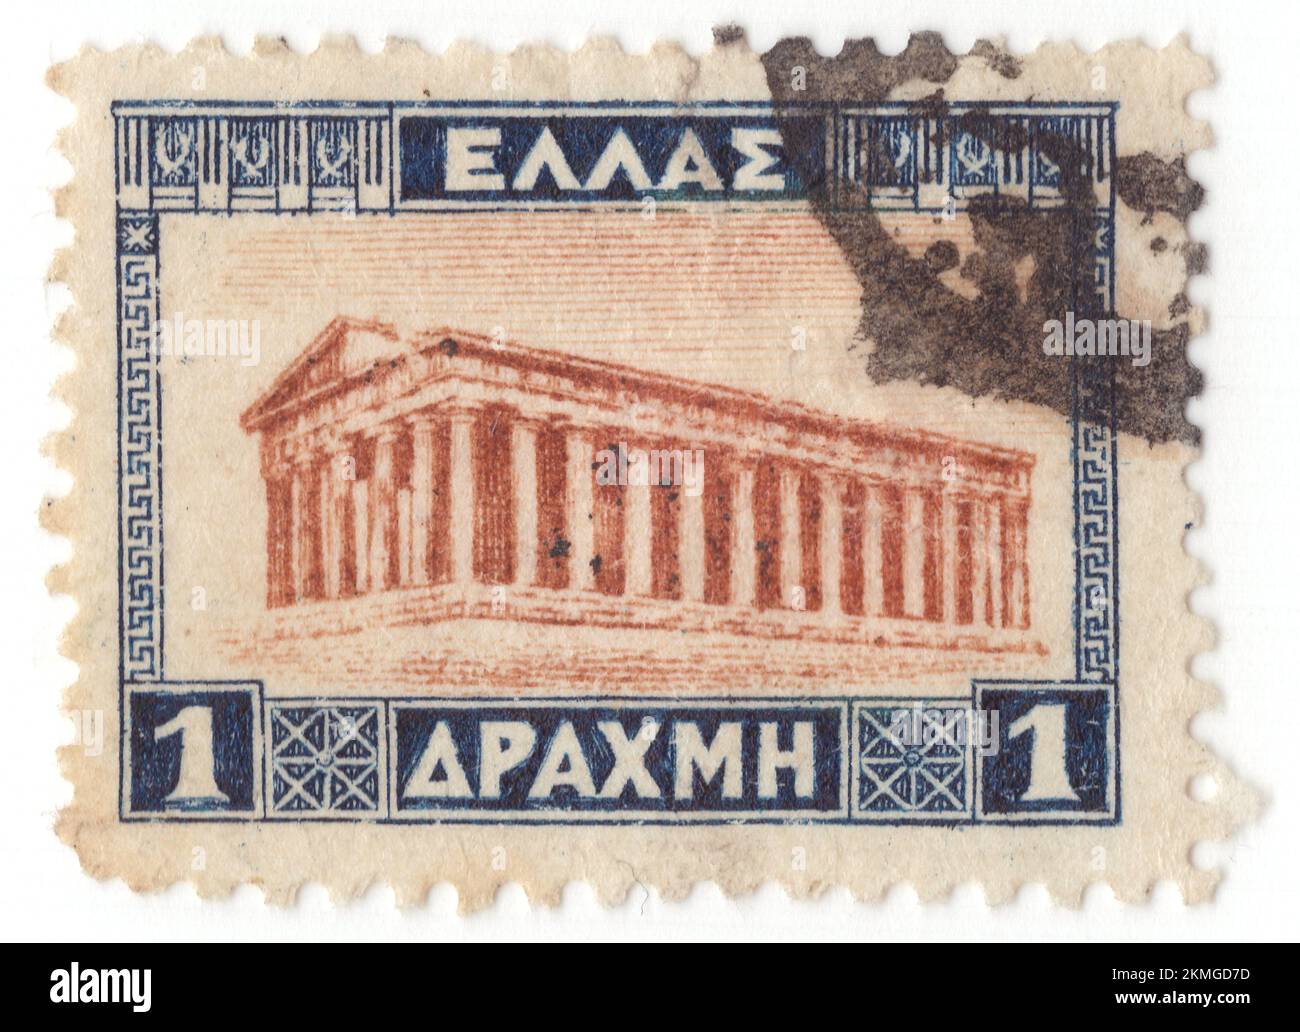 GREECE - 1927 April 1: An 1 drachma dark blue and bister-brown postage stamp depicting Temple of Hephaestus or Hephaisteion (also Hephesteum or Hephaesteum, and formerly called in error the Theseion or Theseum), is a well-preserved Greek temple dedicated to Hephaestus; it remains standing largely intact today. It is a Doric peripteral temple, and is located at the north-west side of the Agora of Athens, on top of the Agoraios Kolonos hill. Hephaestus was the patron god of metal working, craftsmanship, and fire. There were numerous potters' workshops and metal-working shops Stock Photo